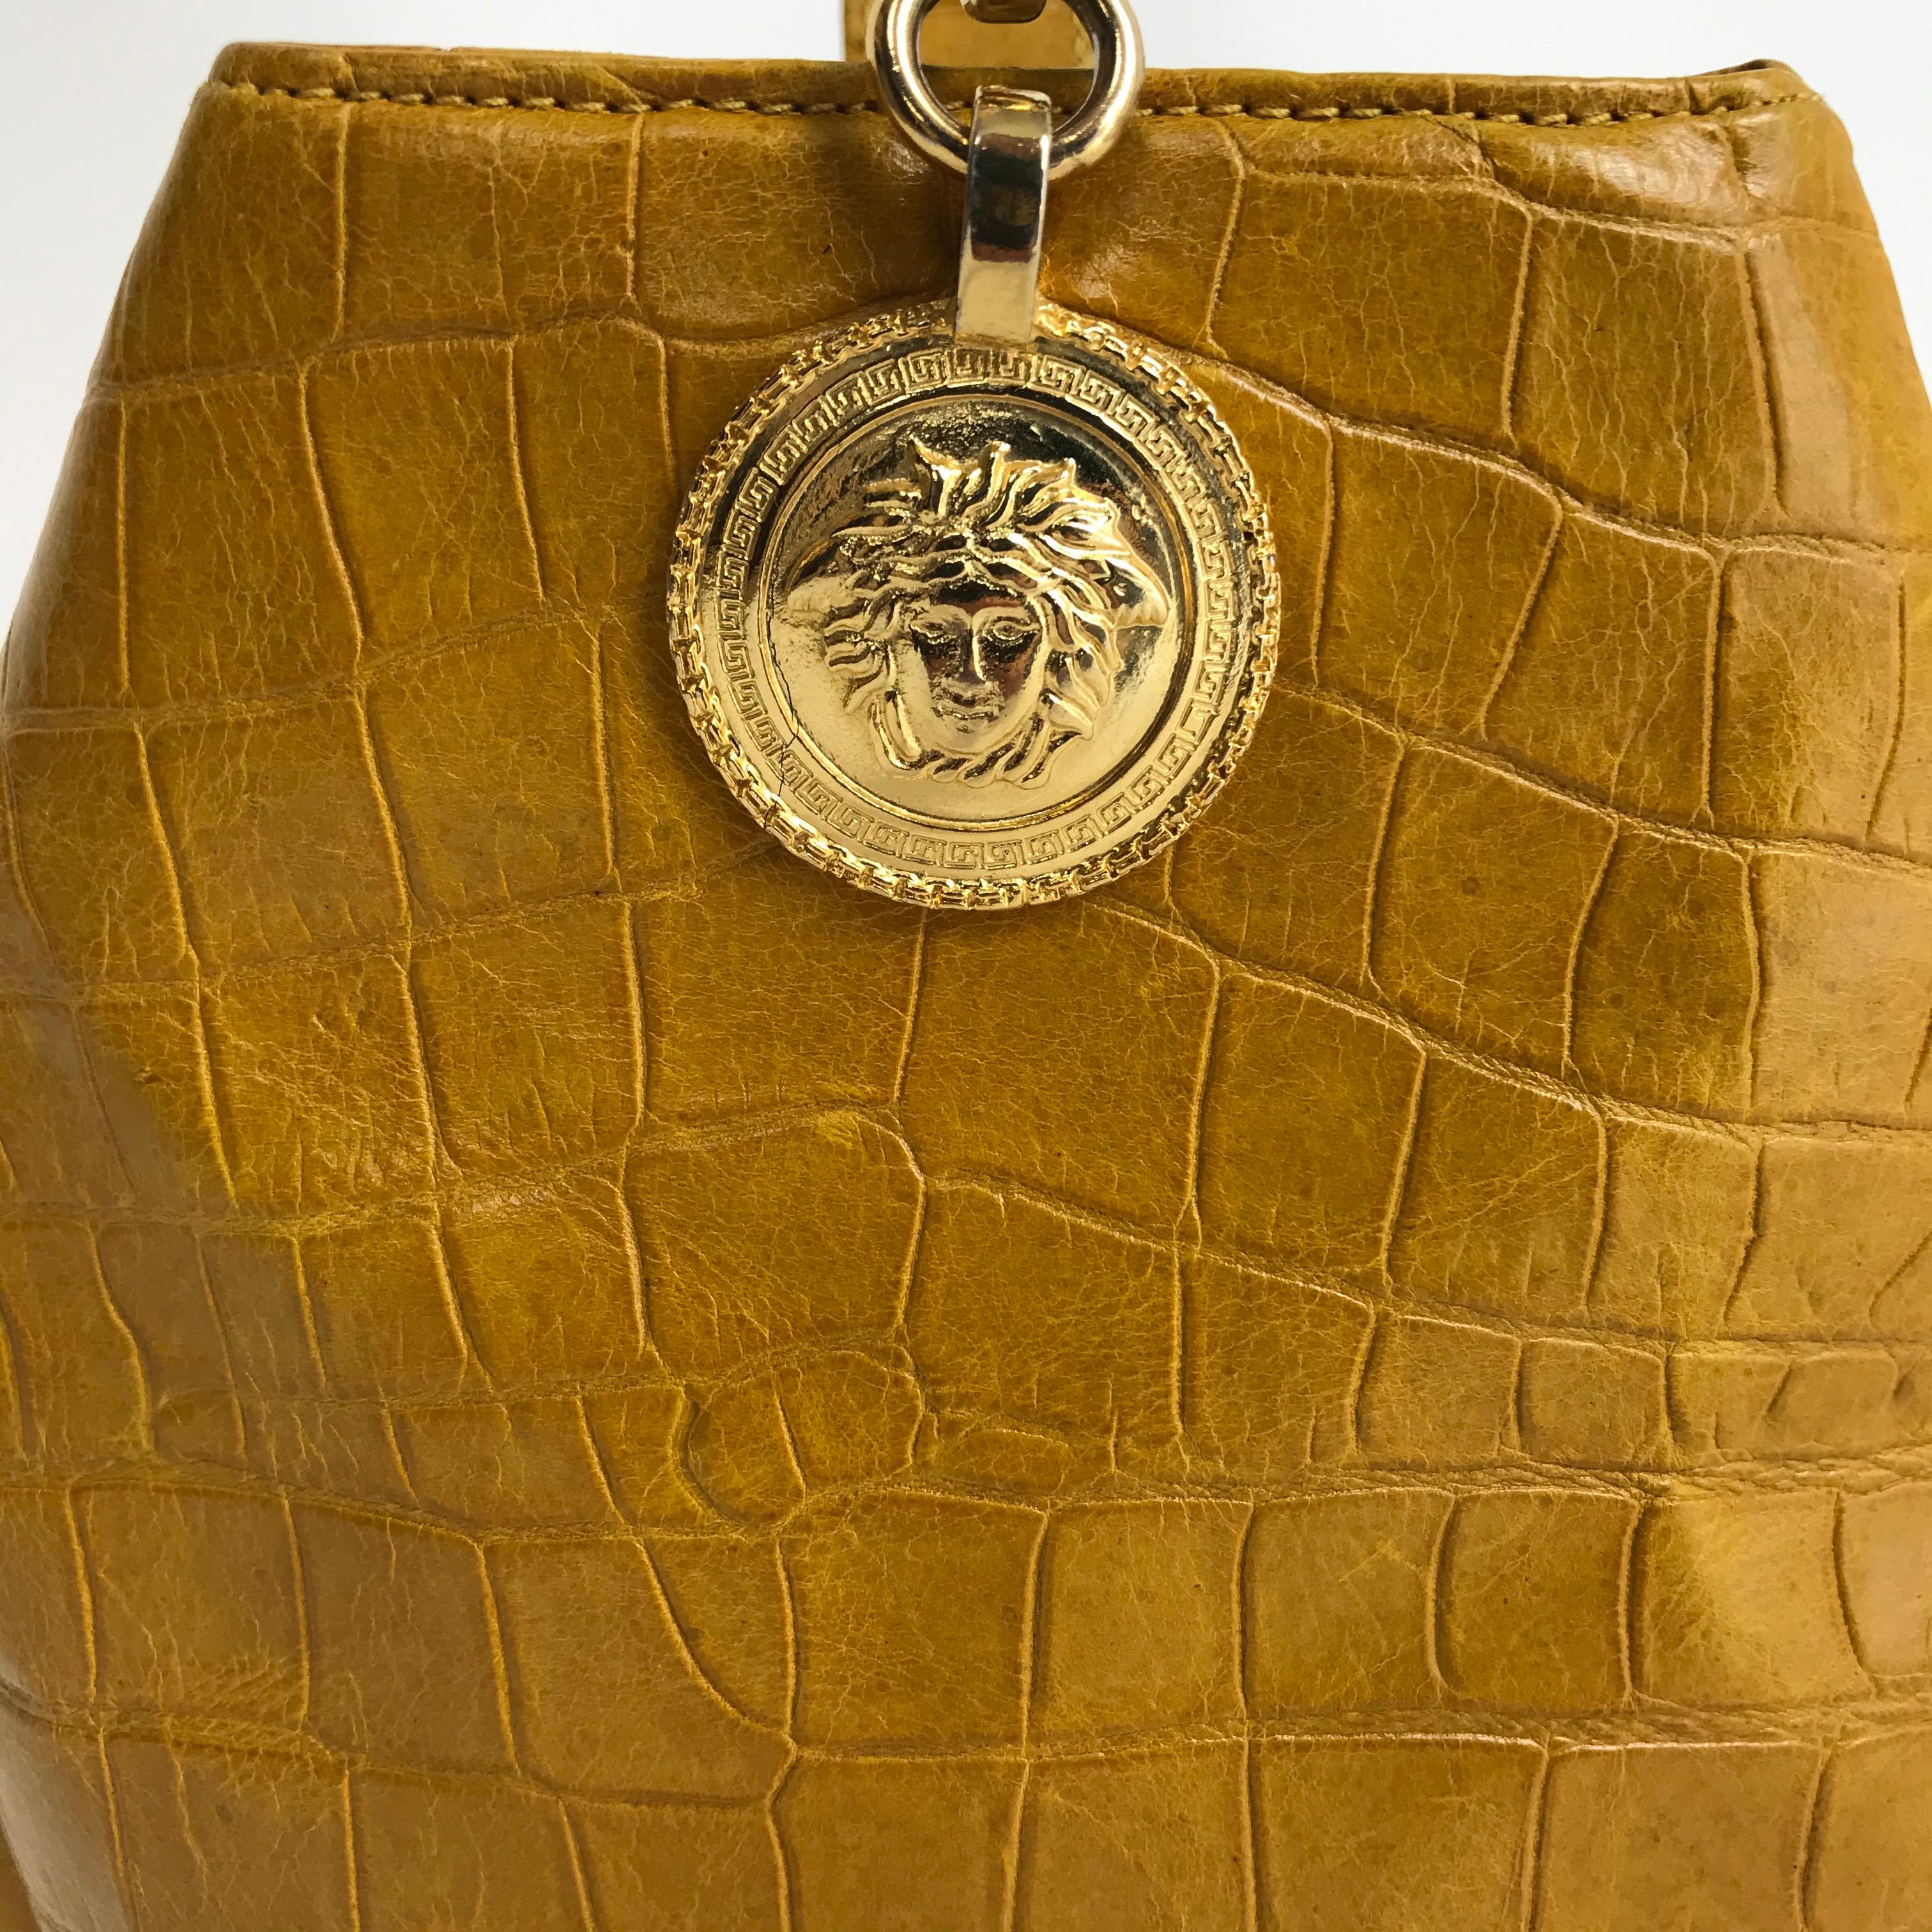 GIANNI VERSACE, Made in Italy, circa 90's. 
Yellow crocodile print bucket bag in good condition. Medusa emblem on gold-tone hardware. 
Height : 23cm / width : 21cm  

Every item is rare and carefully selected. Measurements, quality, material, and